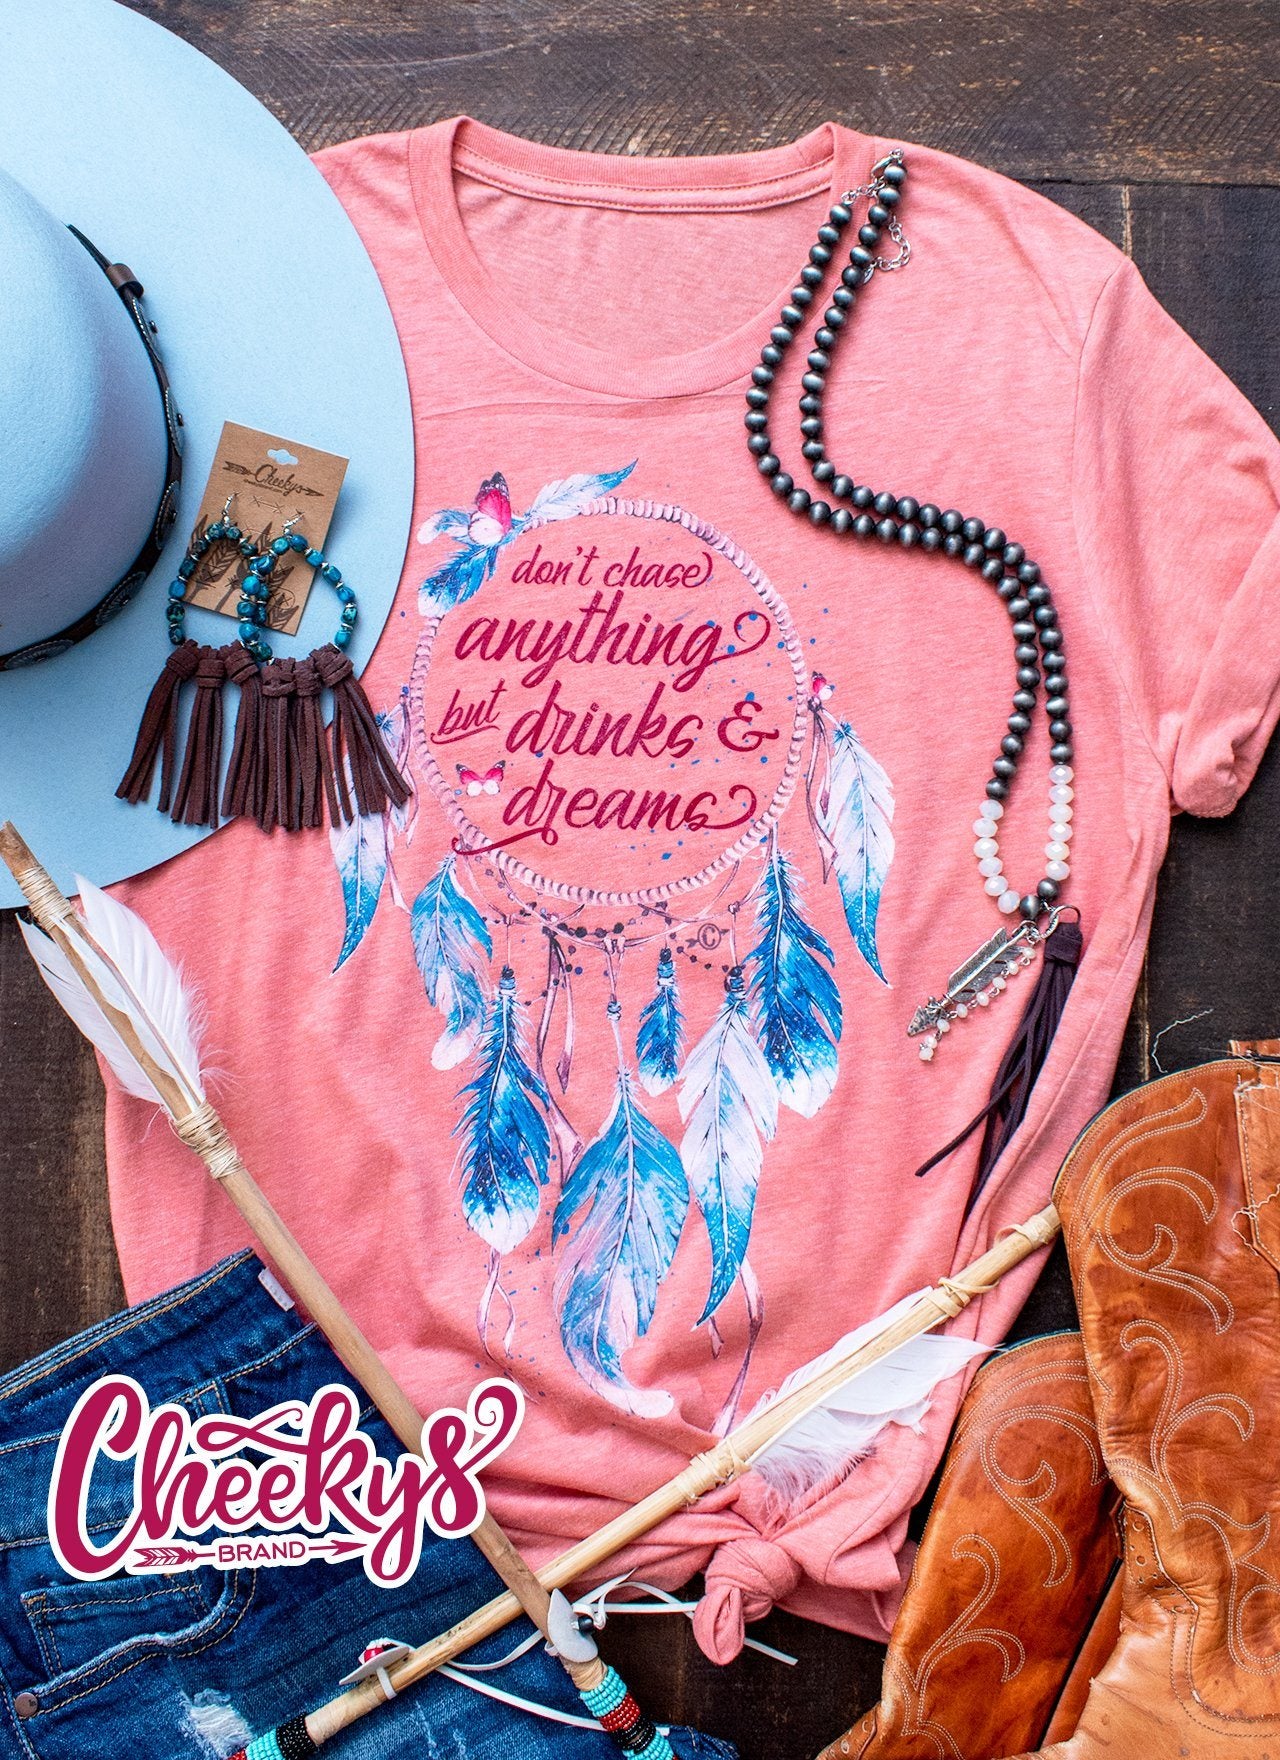 Don't Chase Anything but Drinks and Dreams Unisex Tee on Dreamsicle Cheekys Apparel 37 